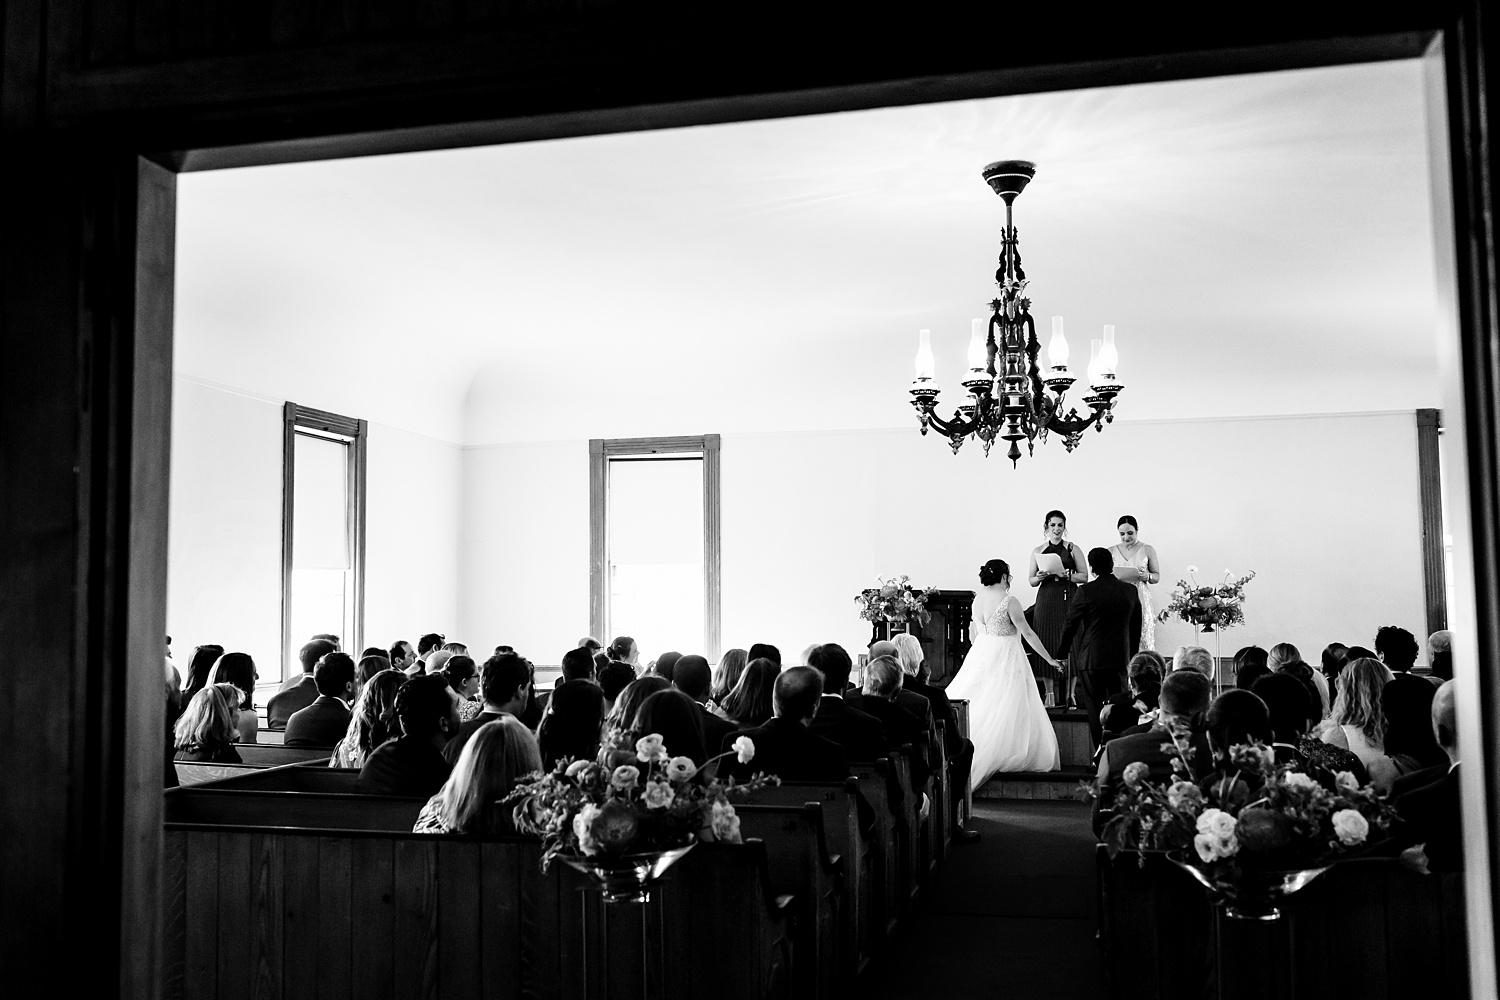 The ceremony in Cape Elizabeth Maine at Spurwink Church